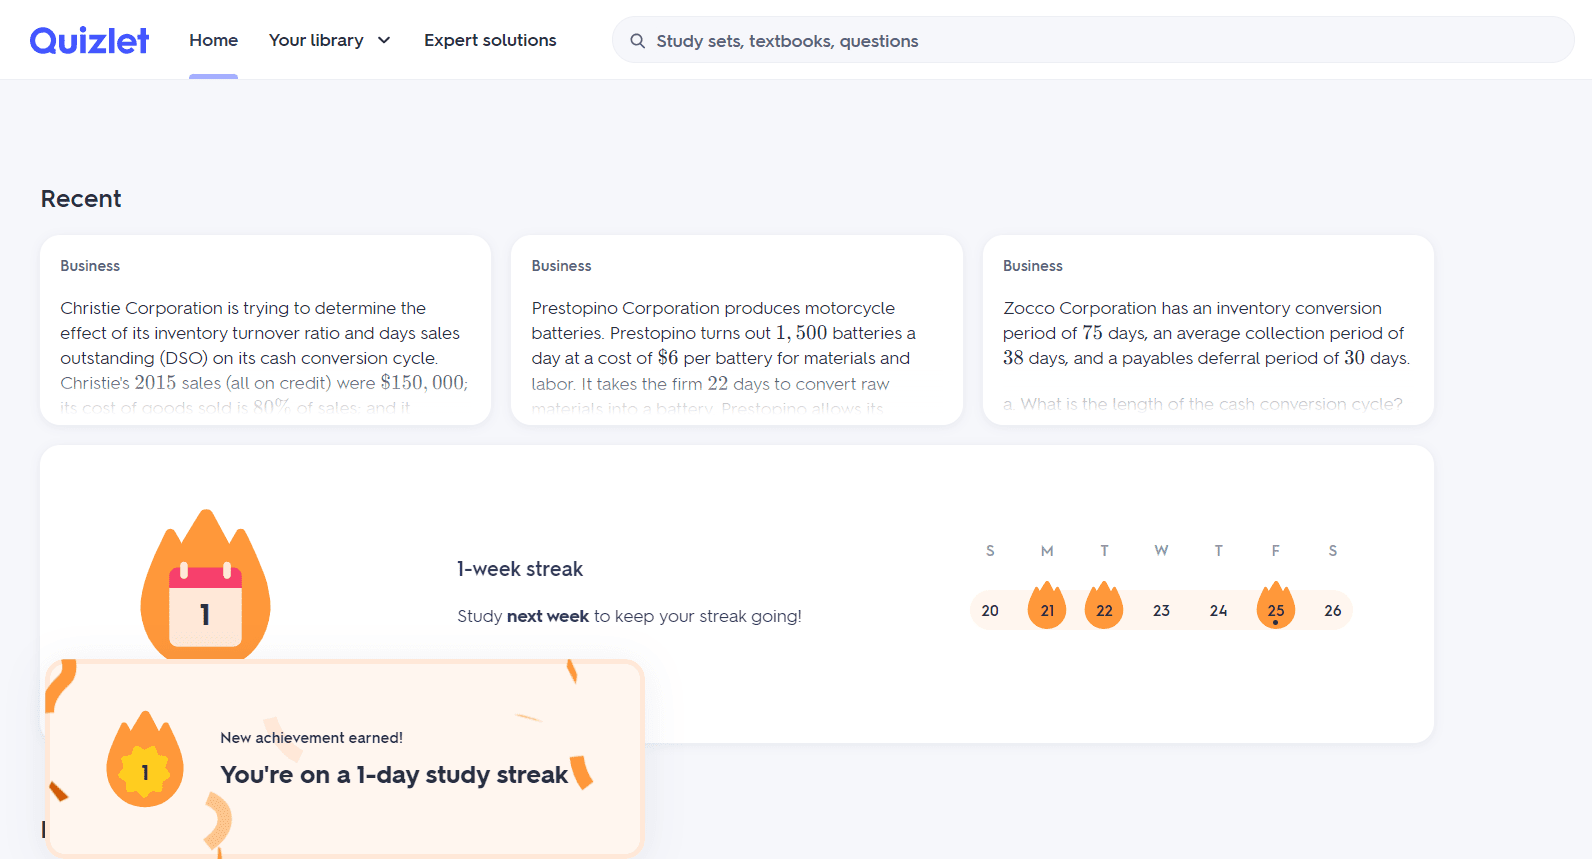 Quizlet Easy to Use